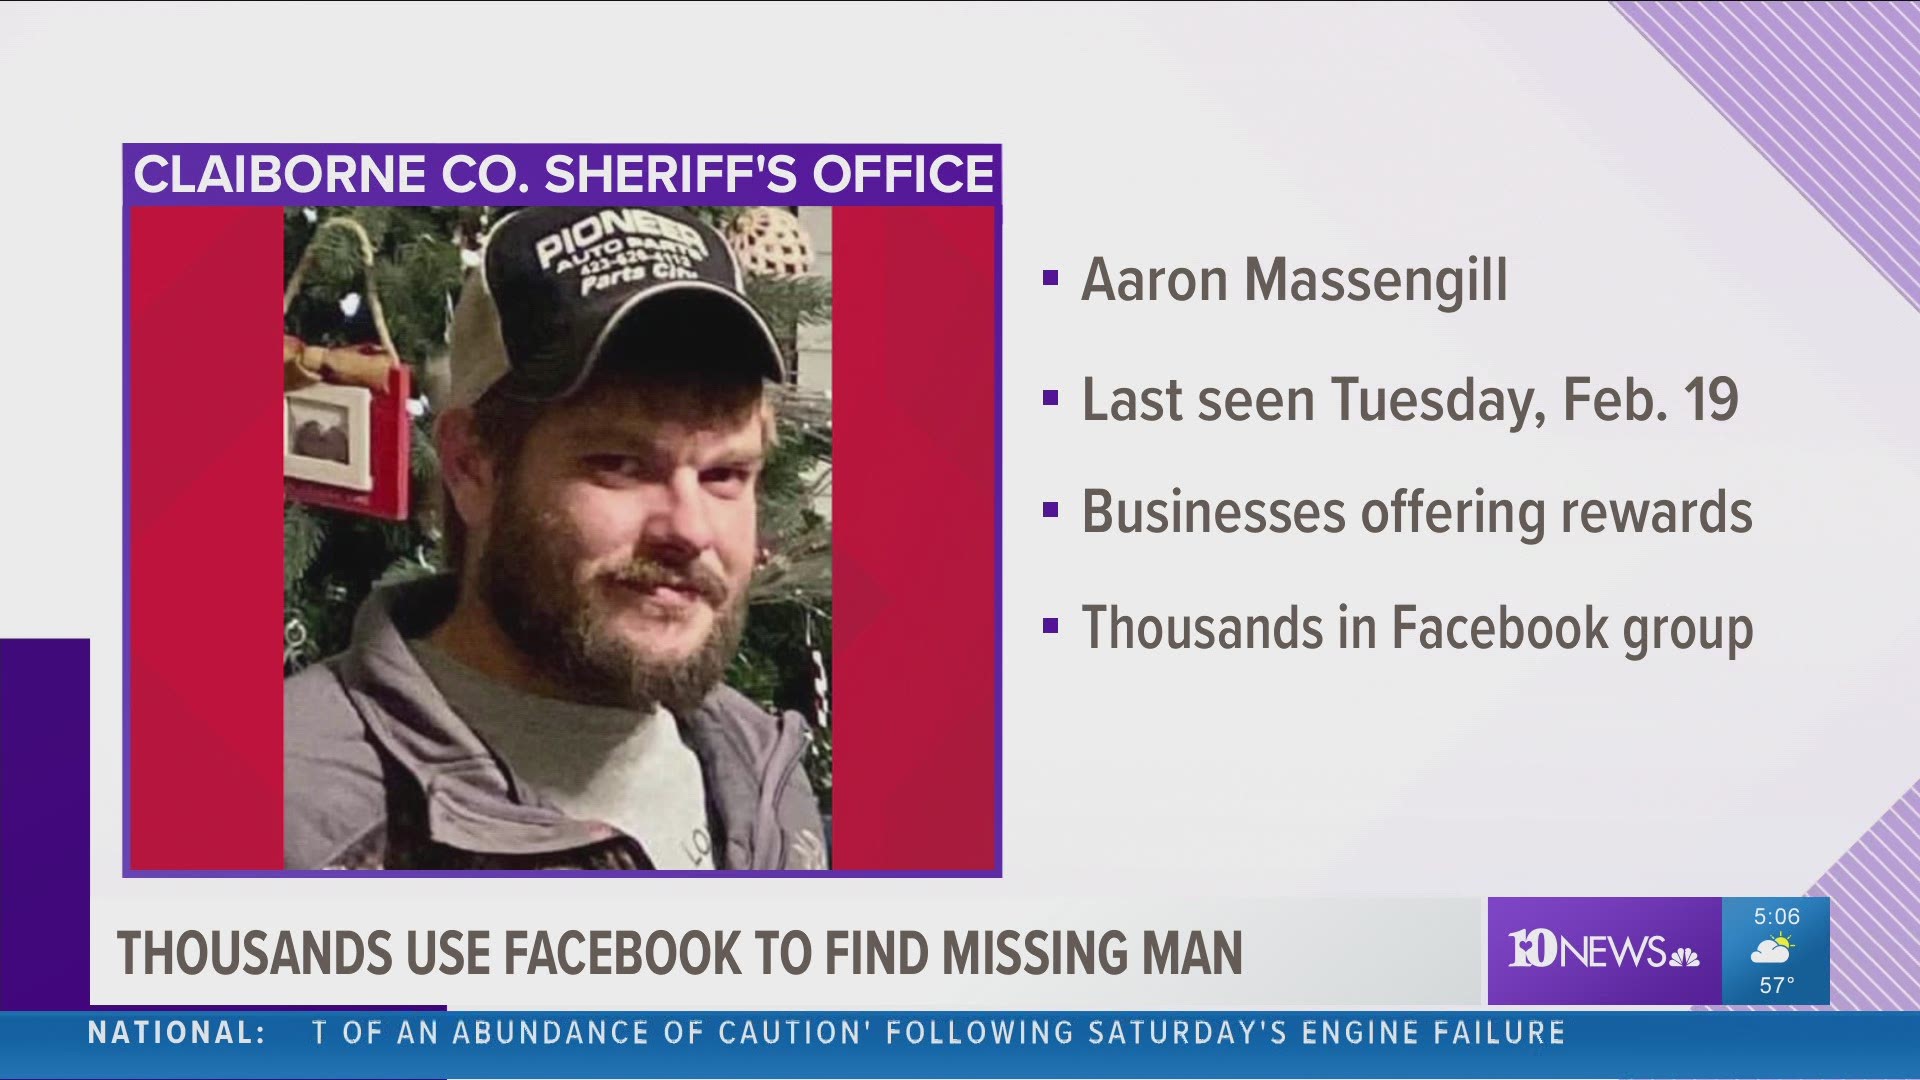 The search is widening for a missing Claiborne County man. Aaron Massengill was last seen last week.